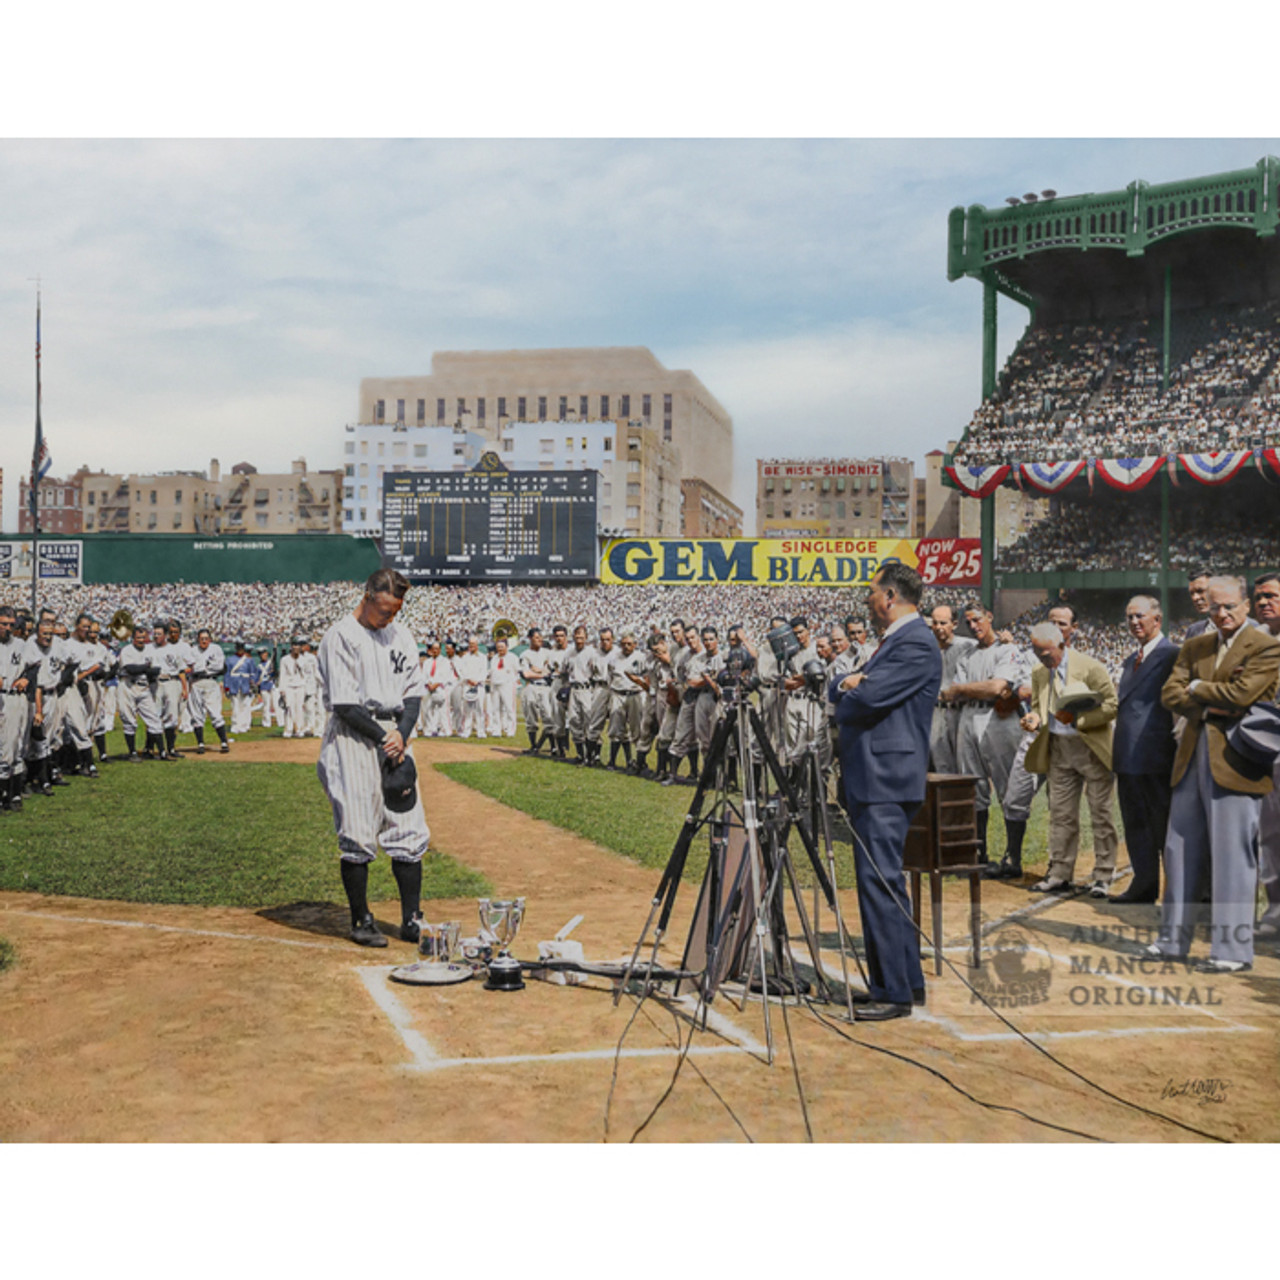 Lou Gehrig New York Yankees 1939 Speech 11 x 14 Colorized Print